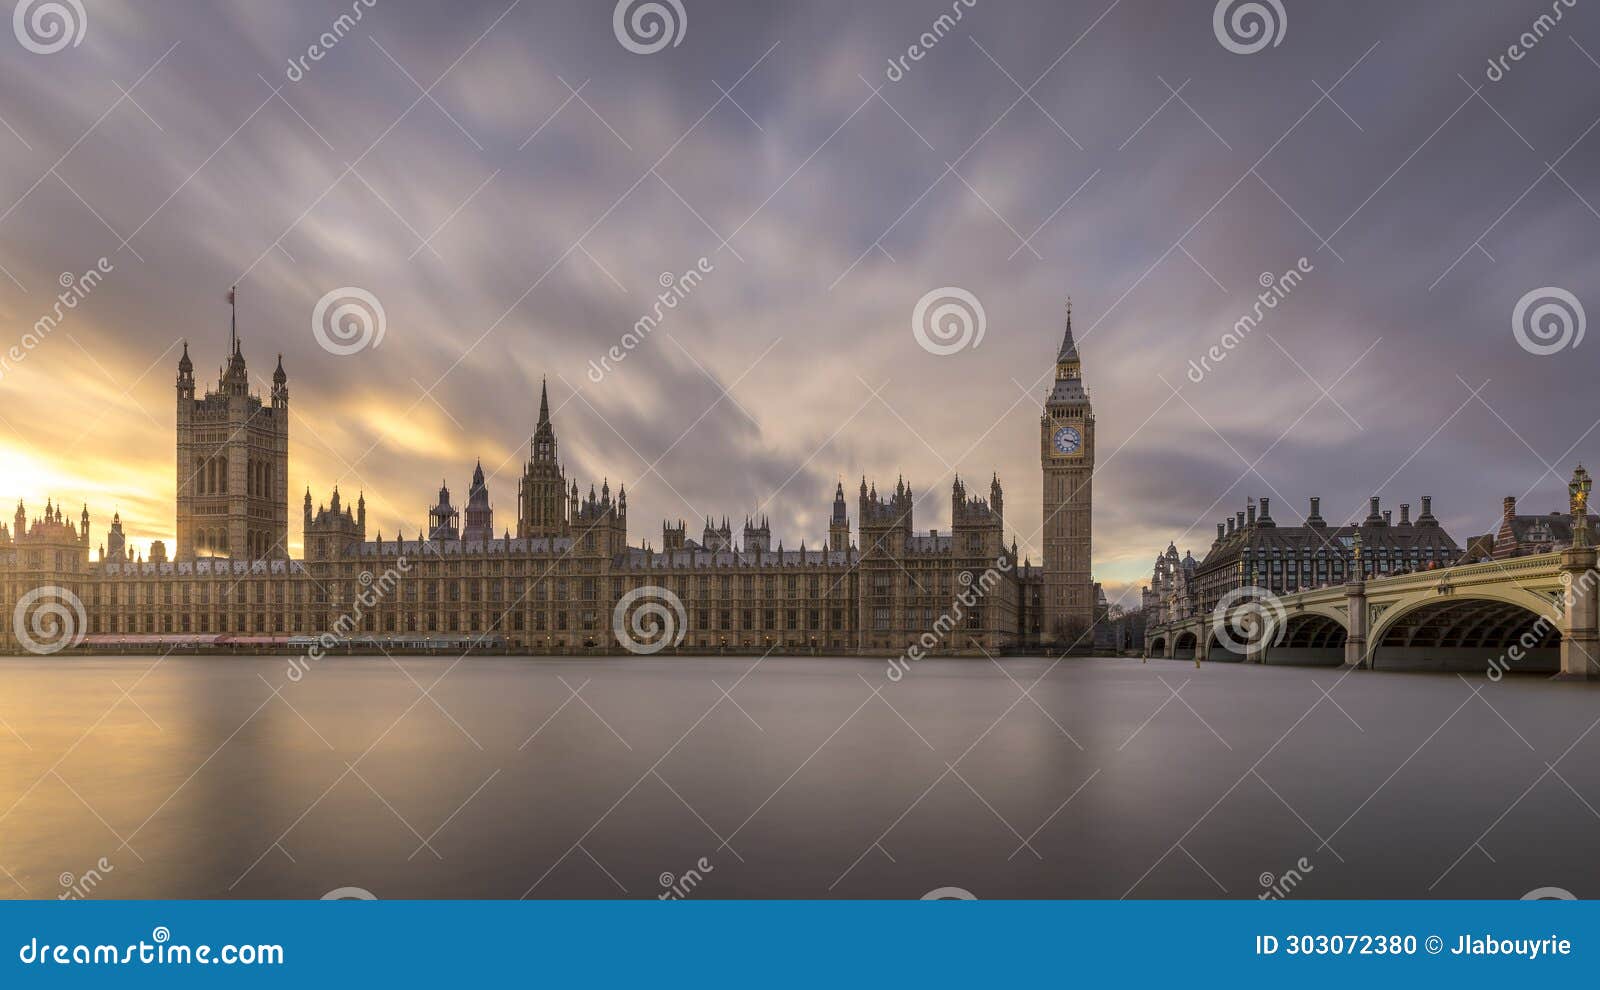 westminster and big ben tower in london, uk